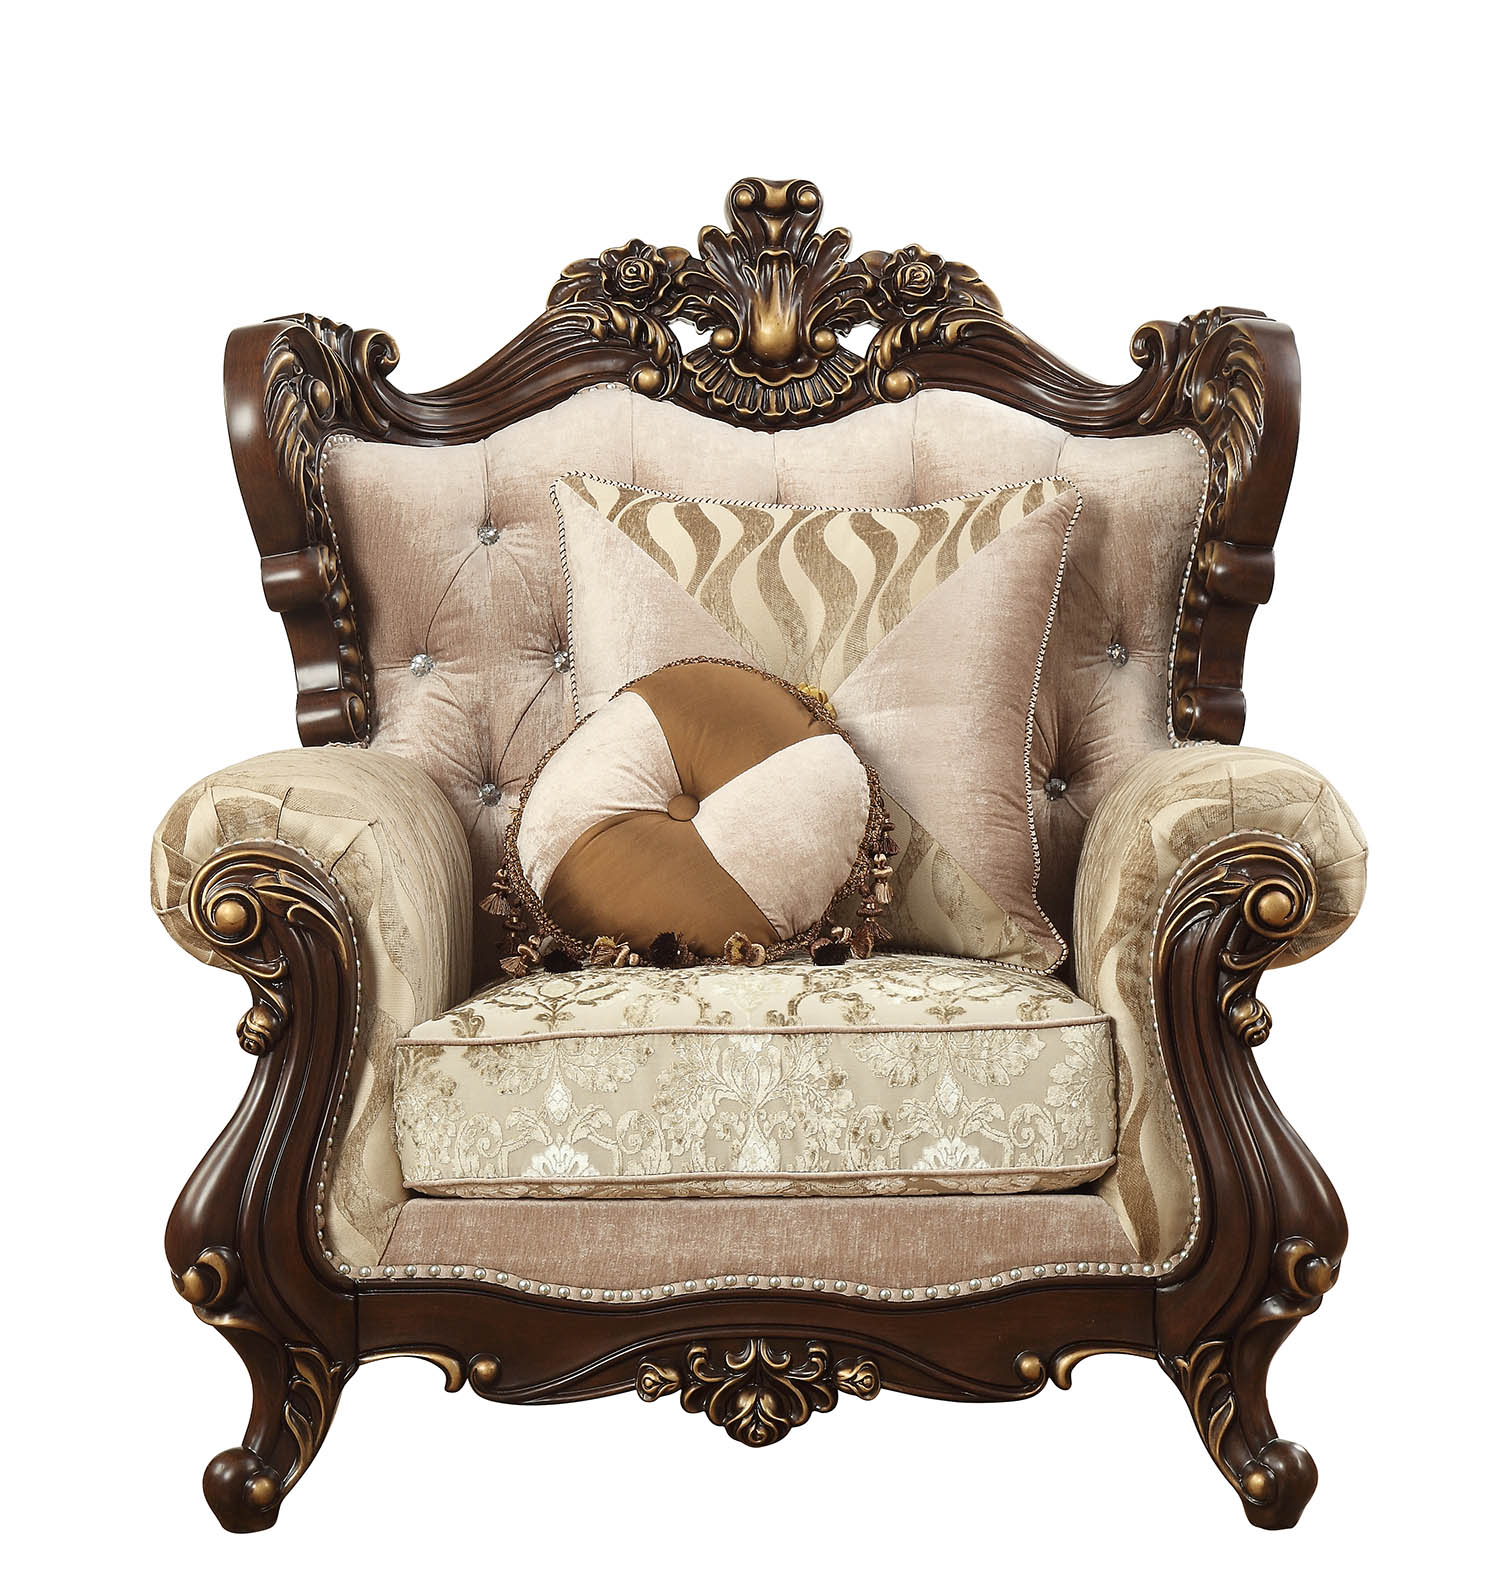 HomeRoots 36" Beige And Brown Fabric Damask Tufted Chesterfield Chair